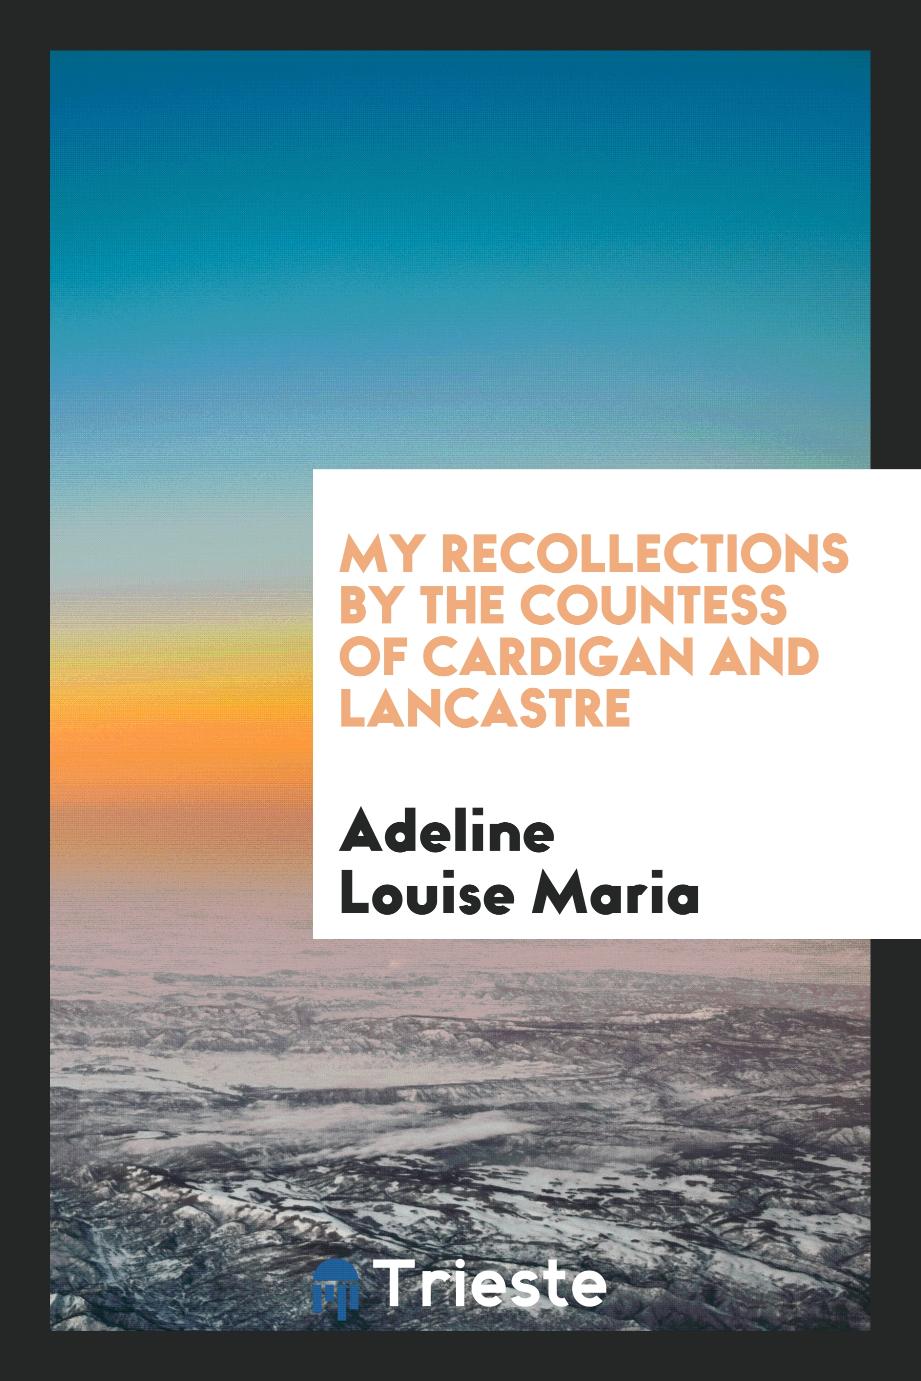 My recollections by the Countess of Cardigan and Lancastre